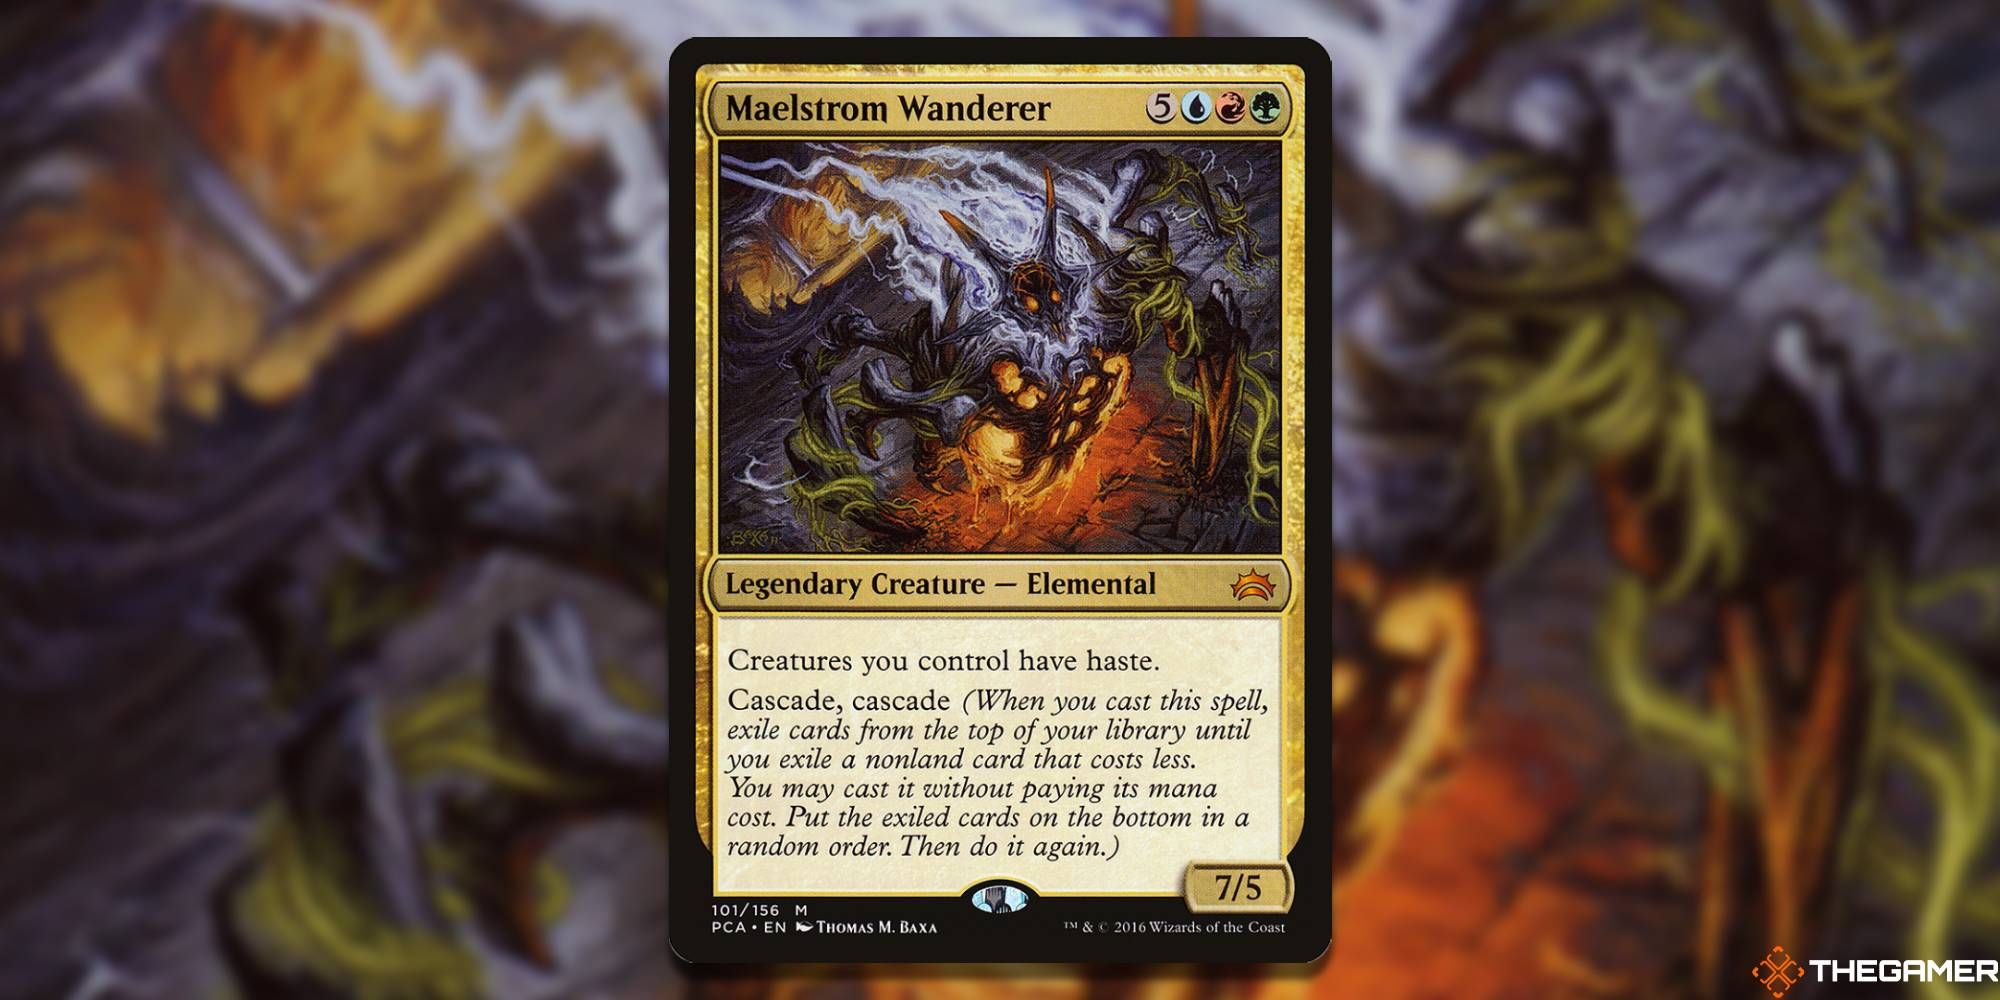 Image of the Maelstrom Wanderer card in Magic: The Gathering, with art by Thomas Baxa